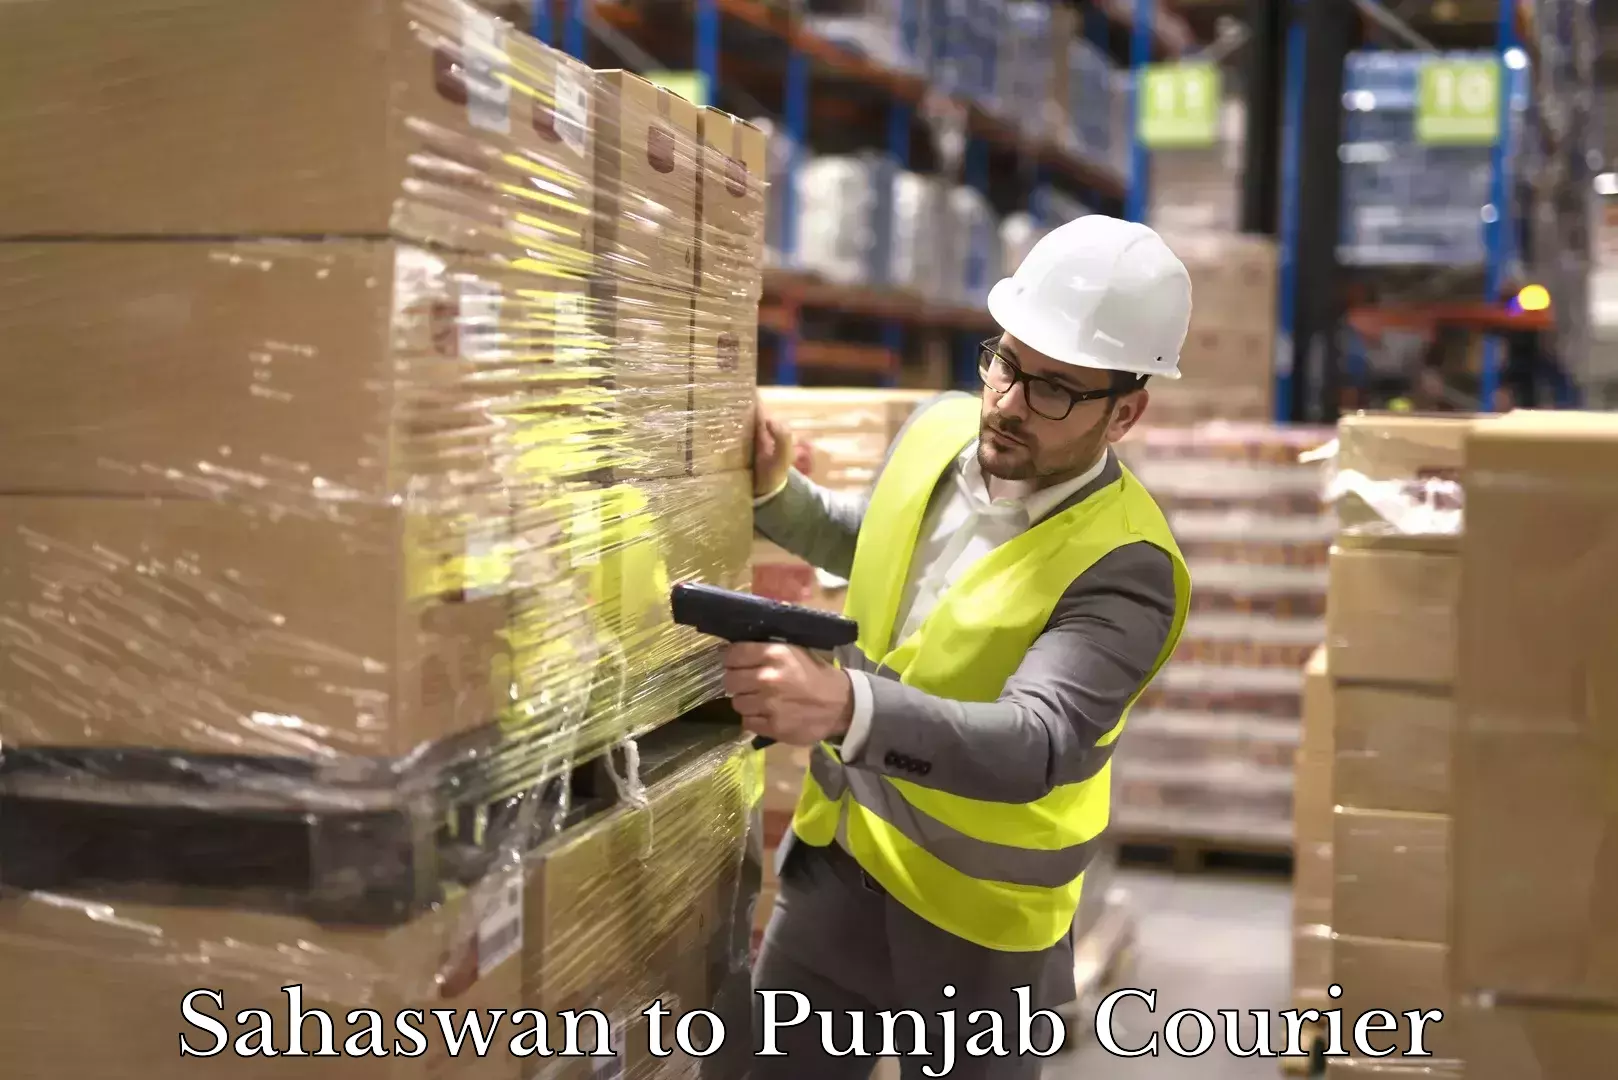 Flexible delivery scheduling Sahaswan to Punjab